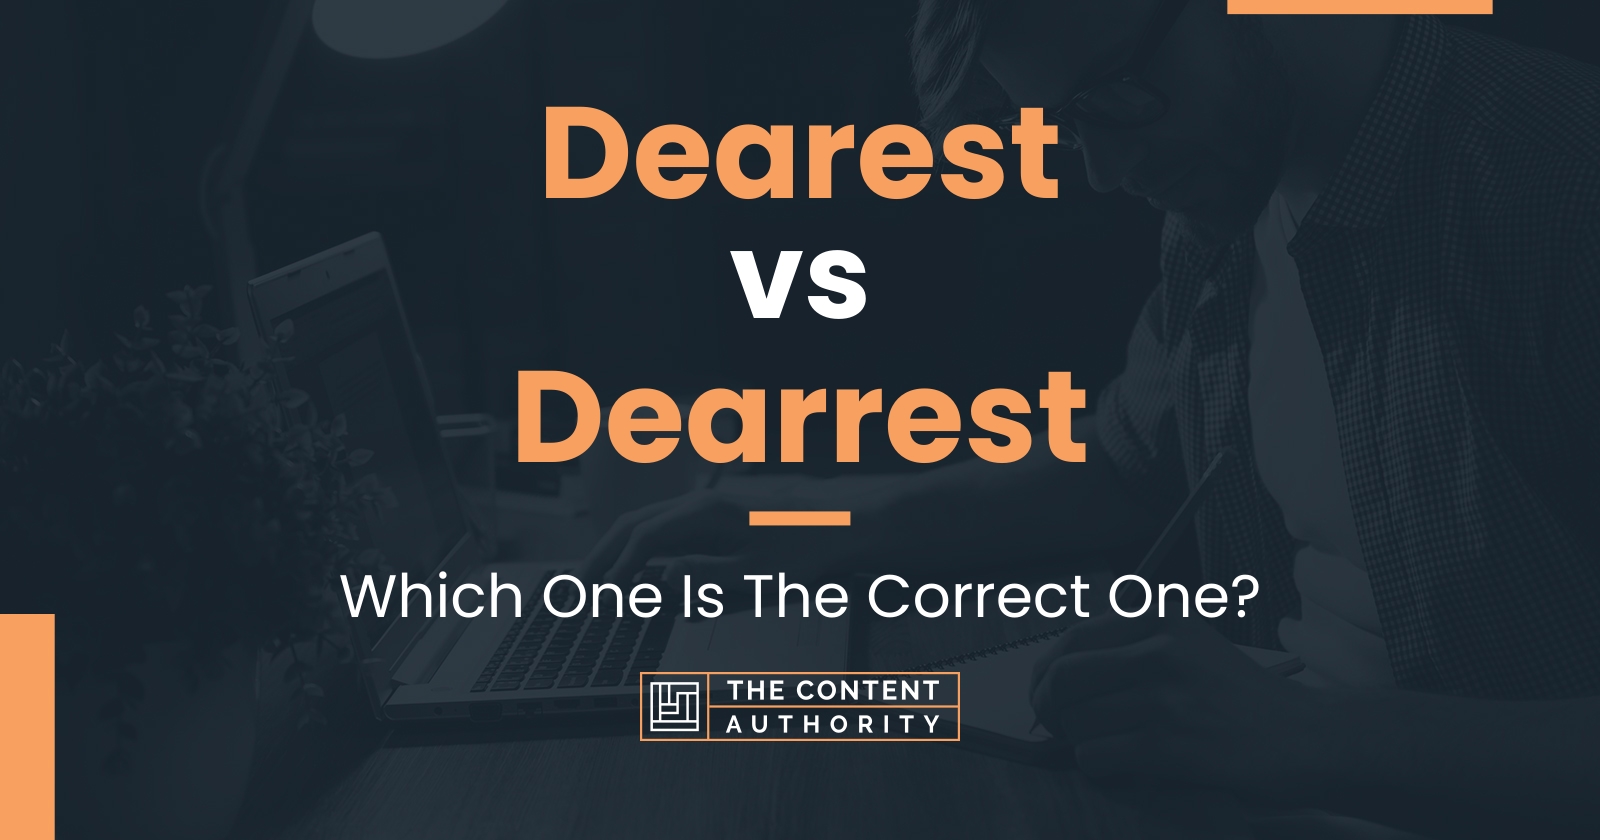 Dearest vs Dearrest: Which One Is The Correct One?